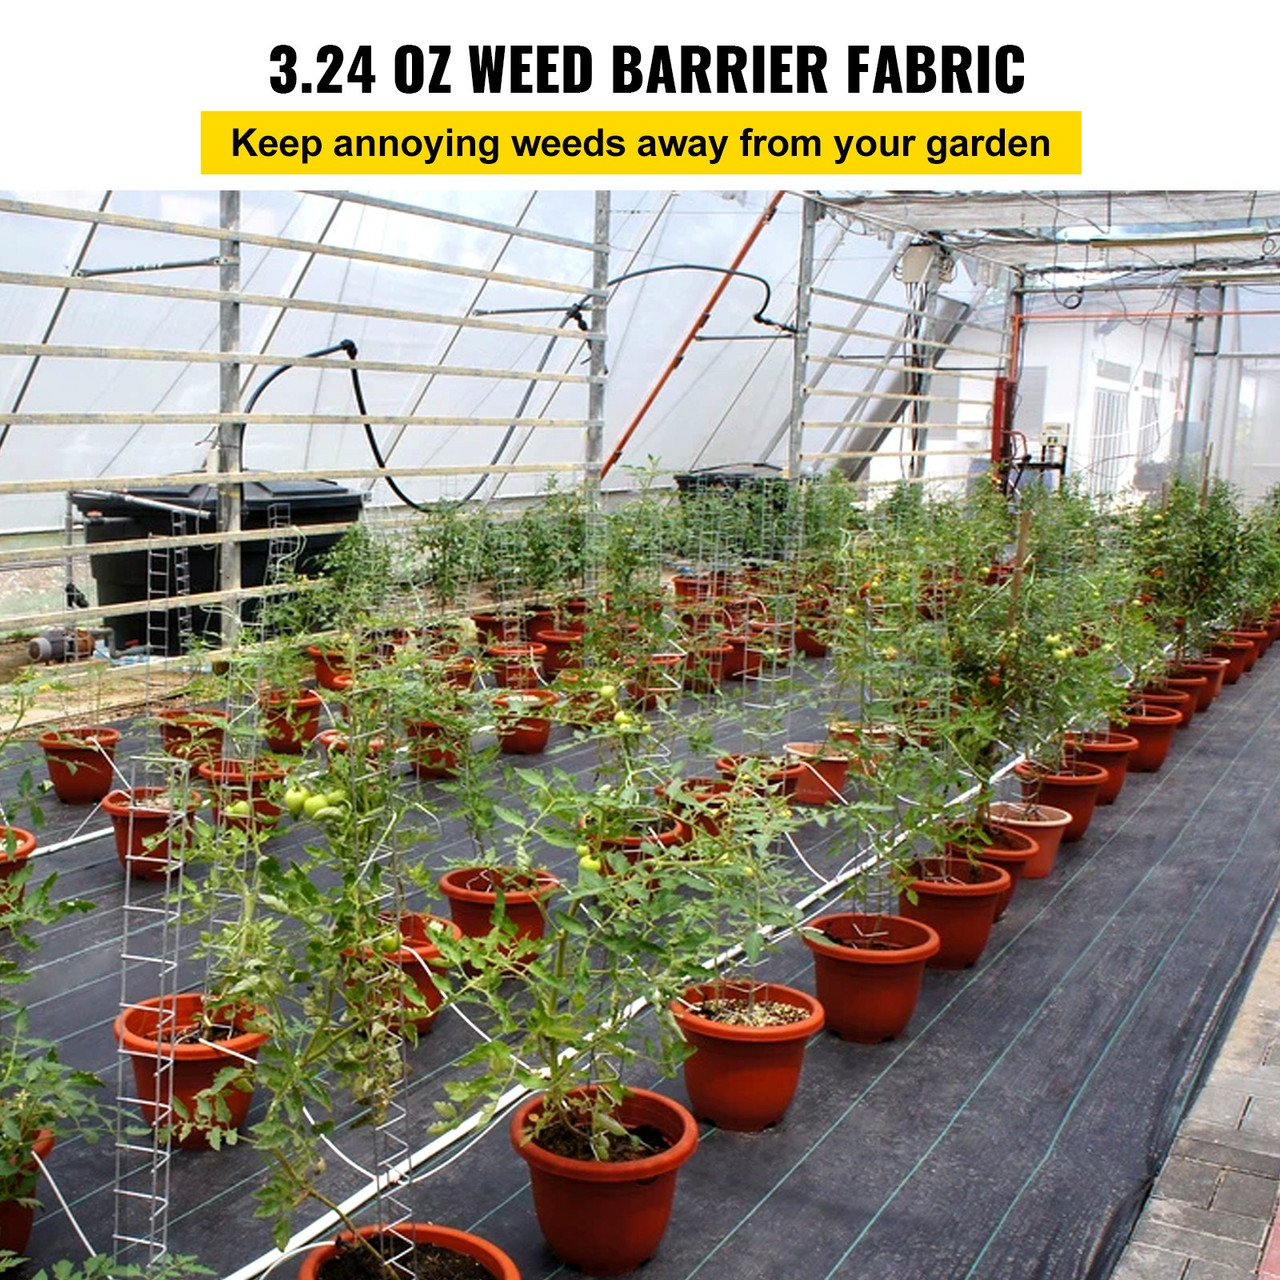 3FTx300FT Premium Weed Barrier Fabric Heavy Duty 3.2OZ, Woven Weed Control Fabric, High Permeability Good for Flower Bed, Geotextile Fabric for Underlayment, Polyethylene Ground Cover